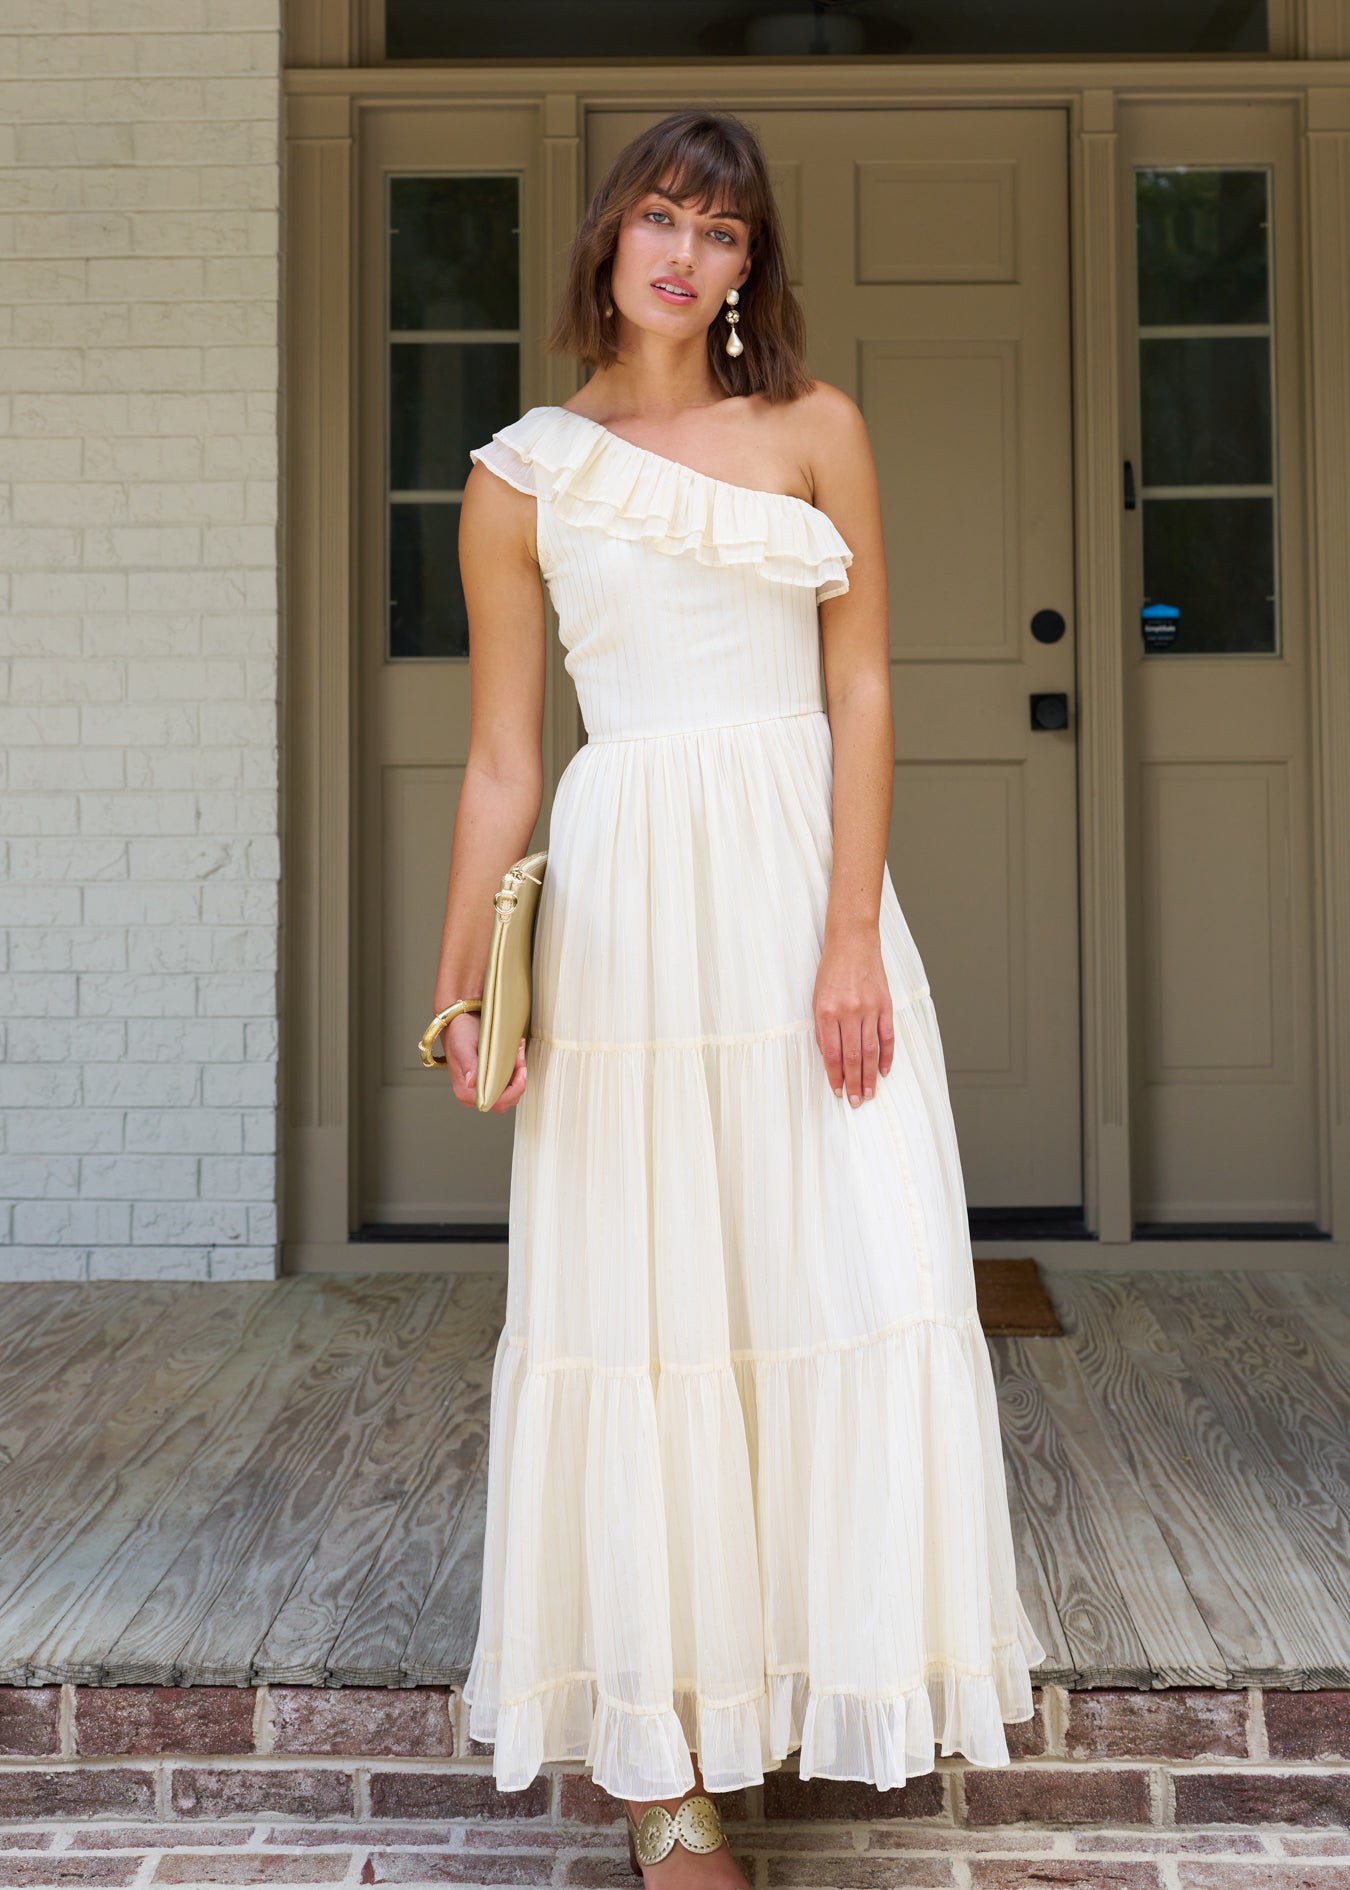 Woman with short brown hair standing on a porch wearing the ivory and gold metallic one shoulder maxi dress.